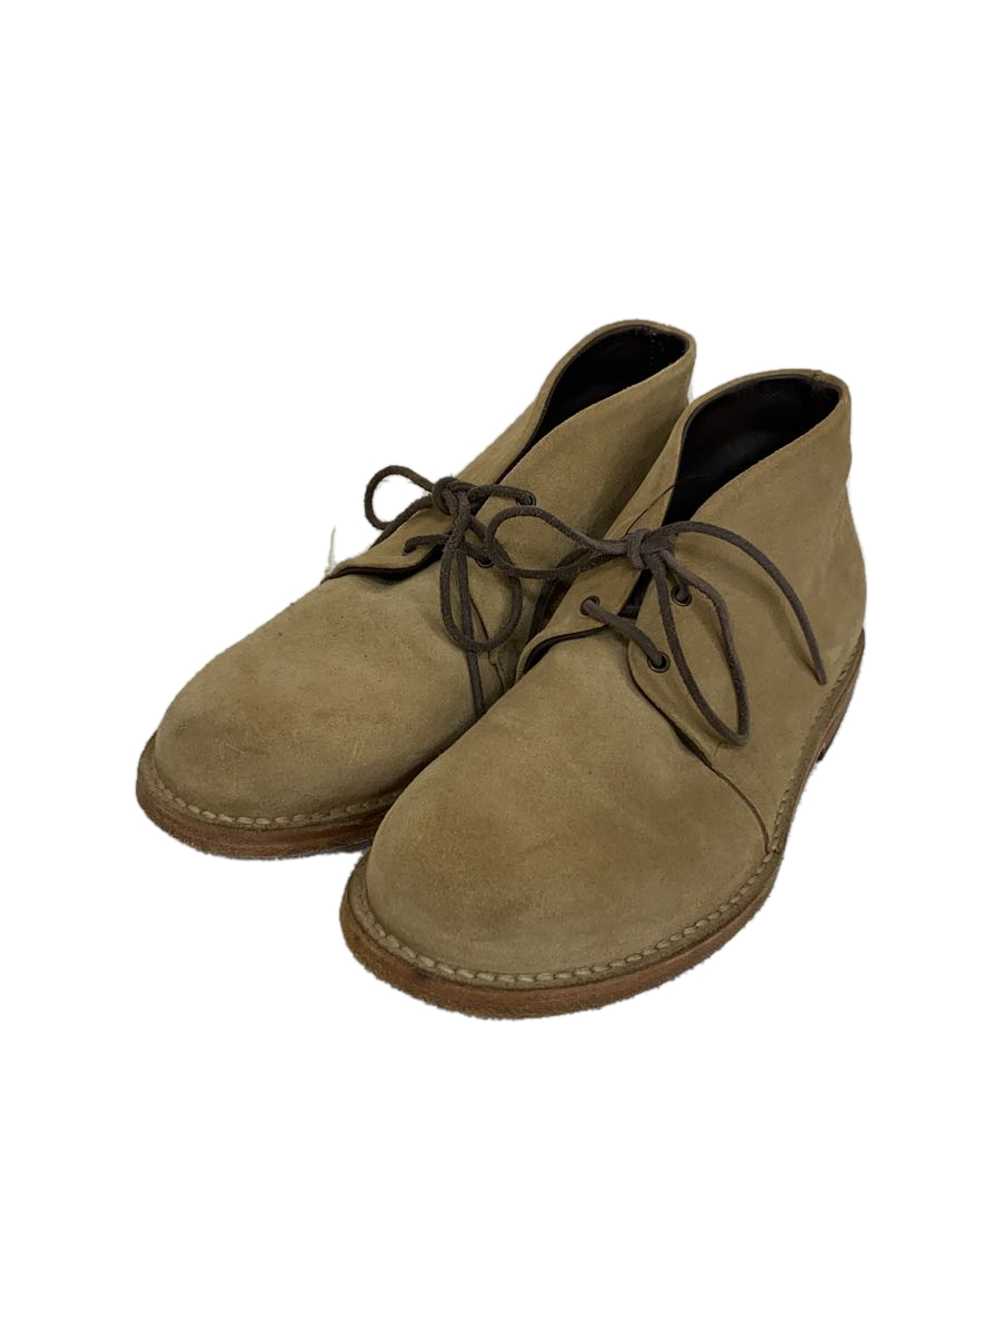 Punto Pigro Shoes/37/Beg/Suede Shoes BfQ53 - image 2